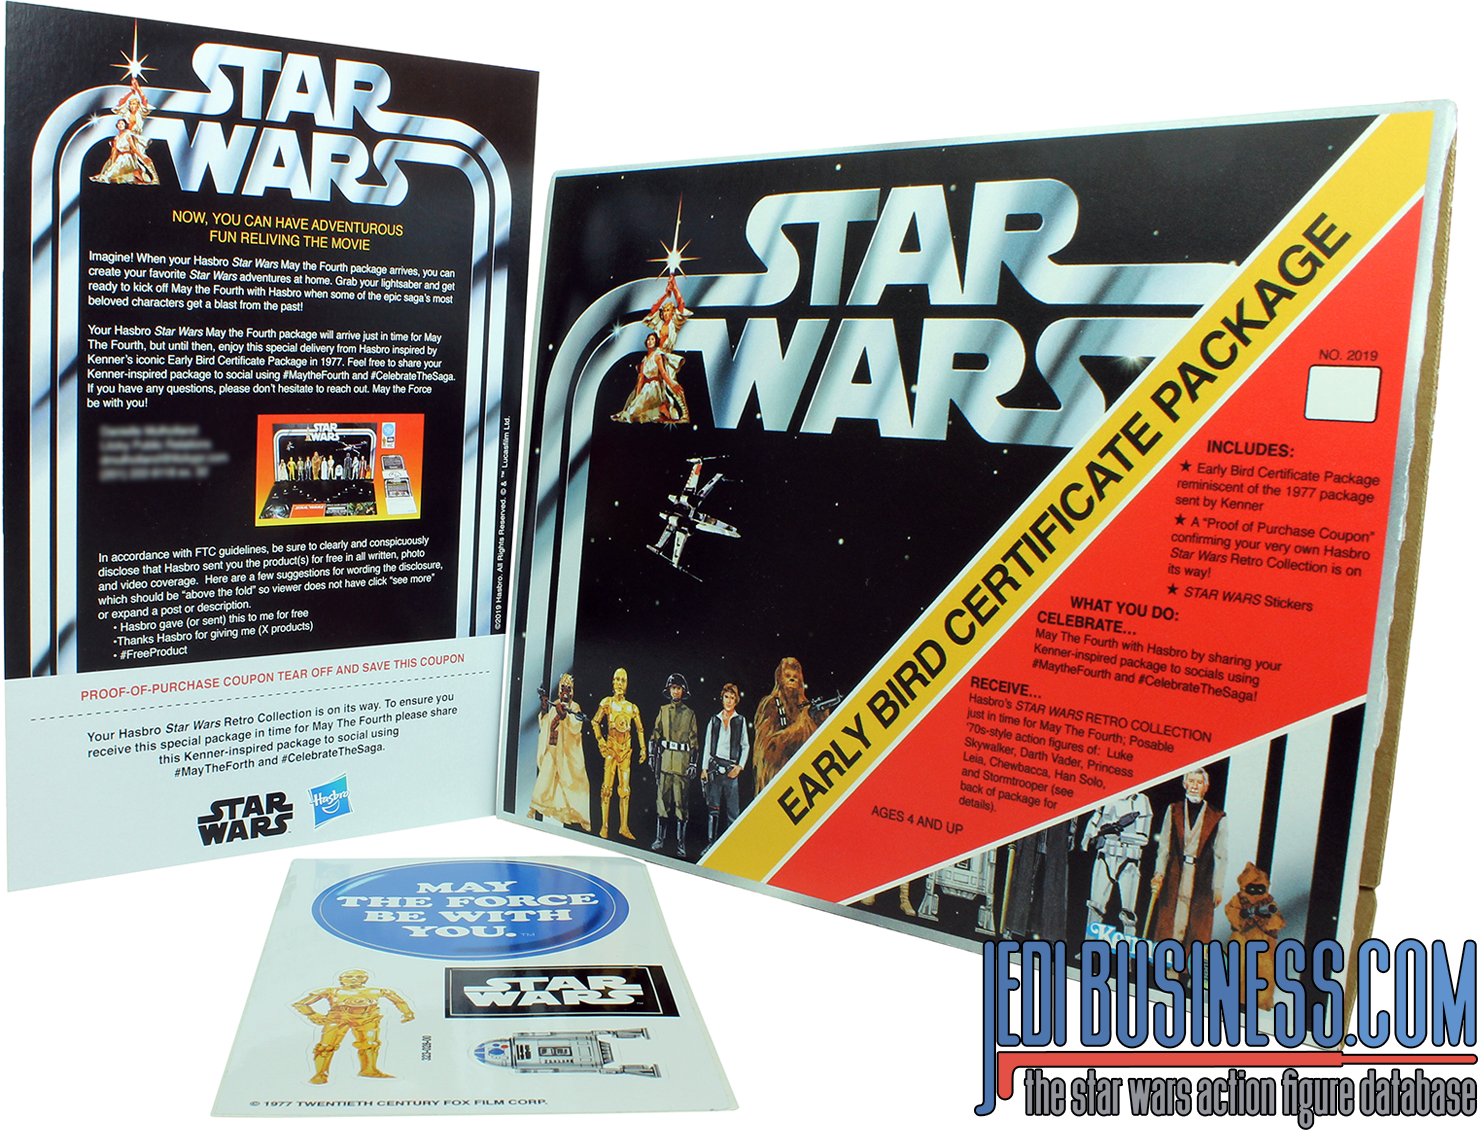 Star Wars Retro Collection Early Bird Homage